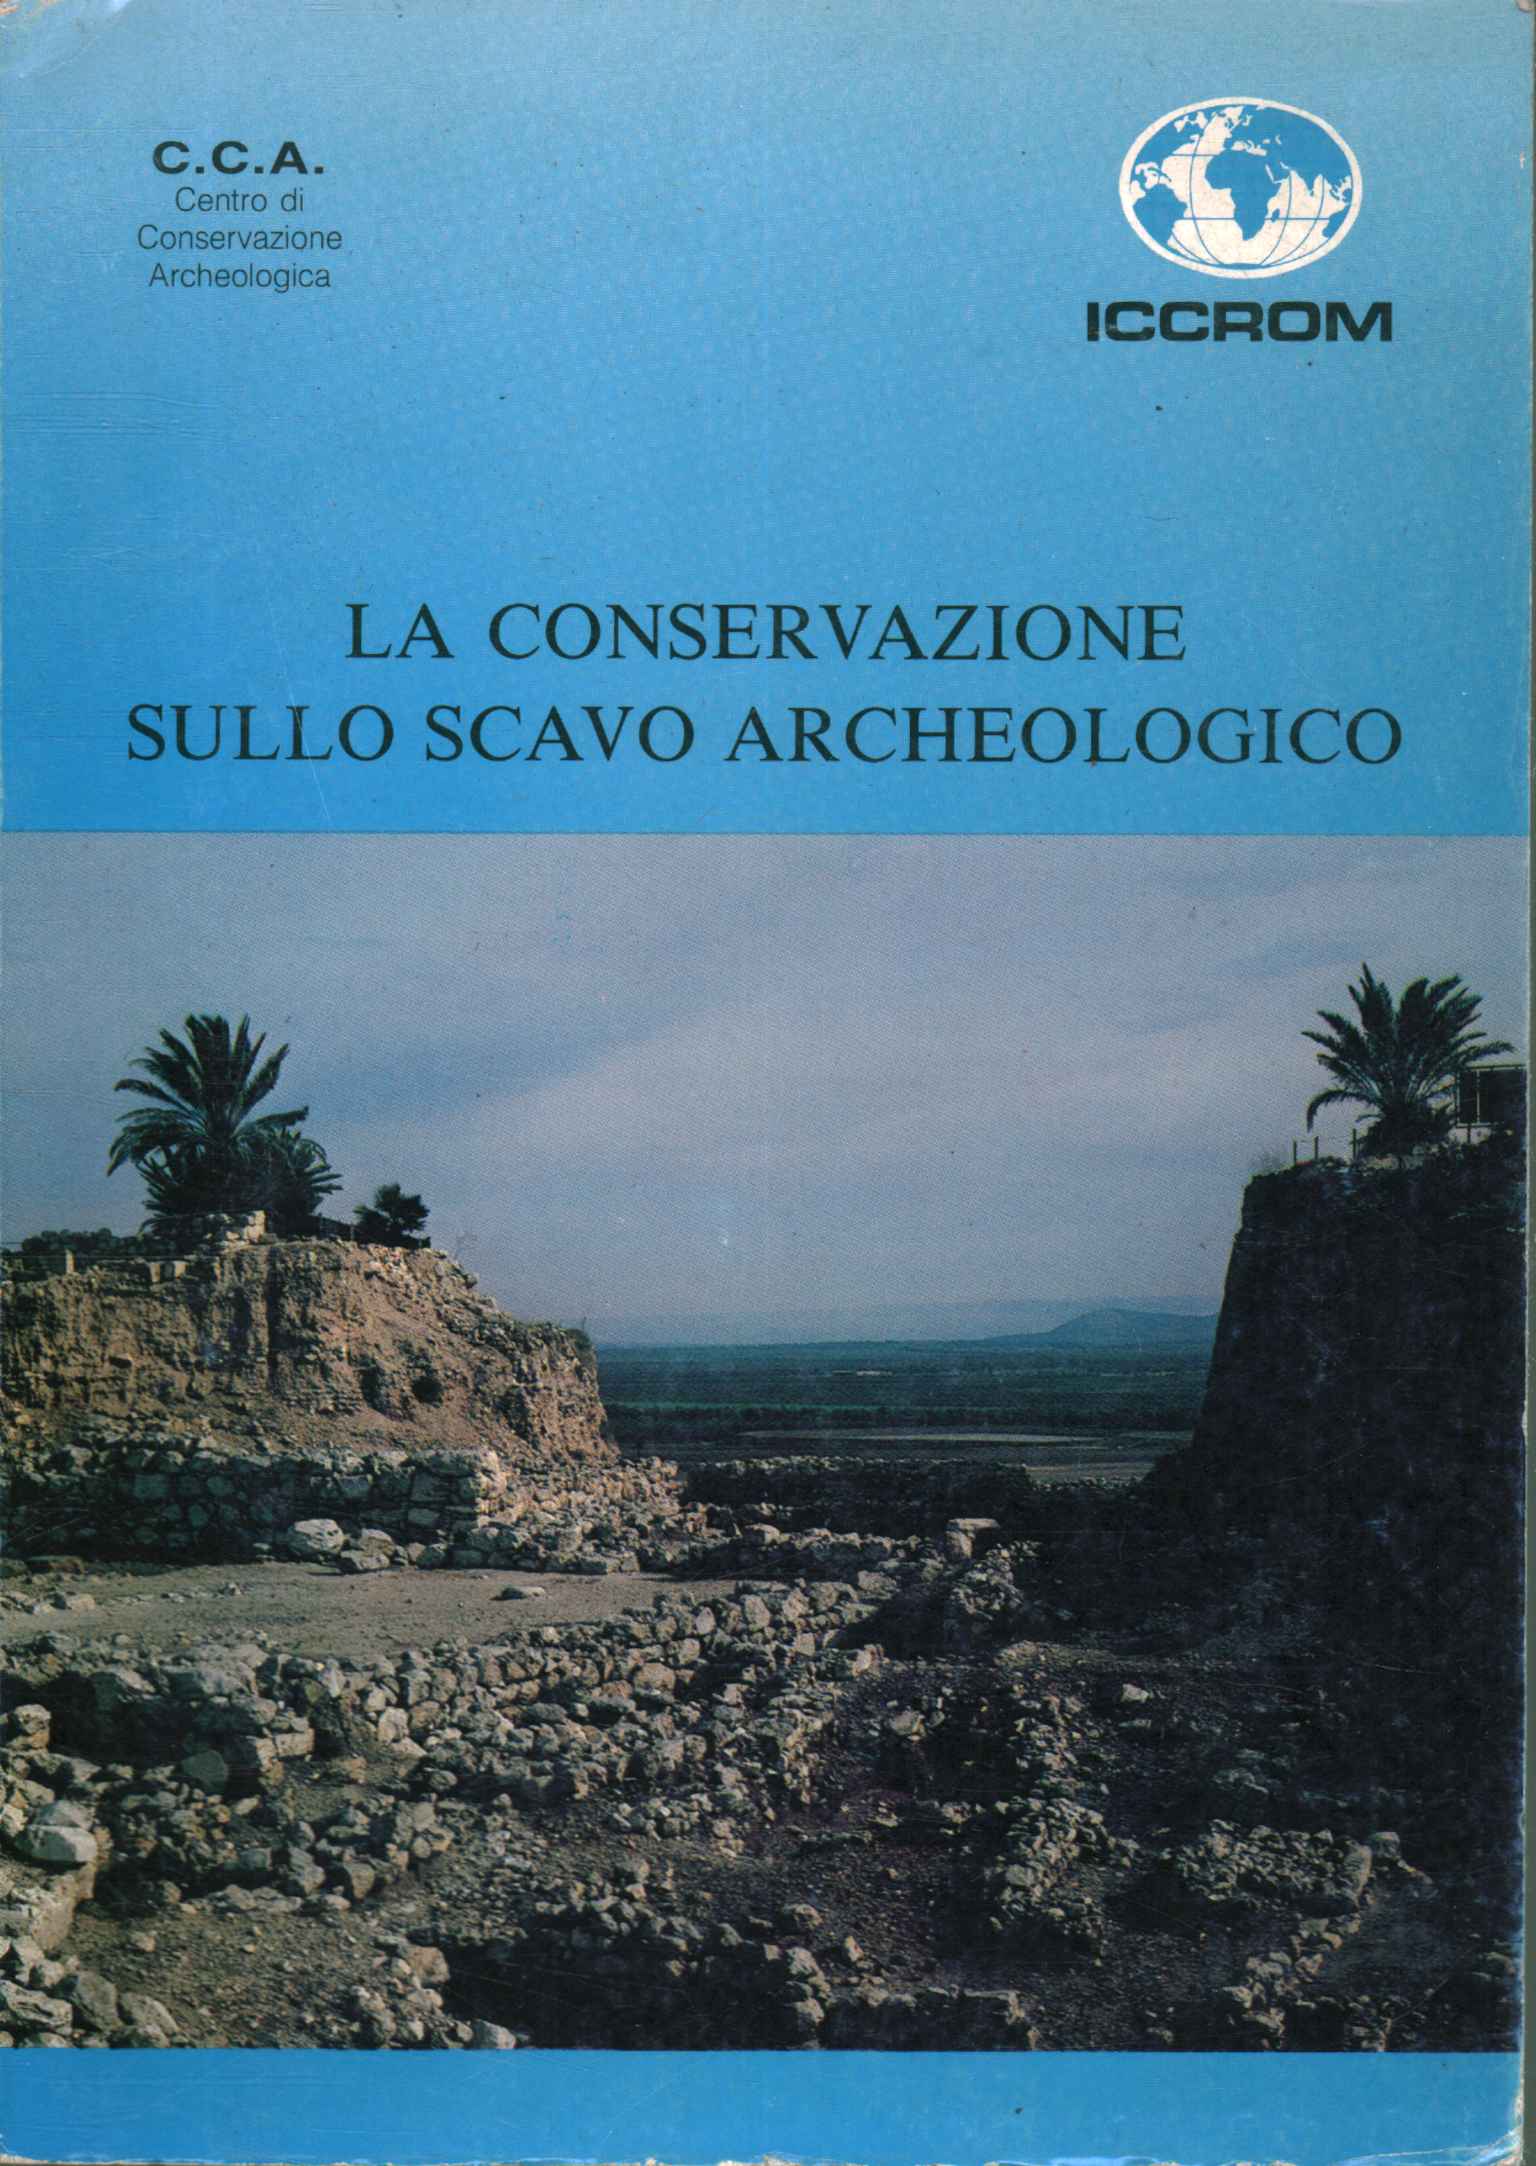 Conservation on archaeological excavation